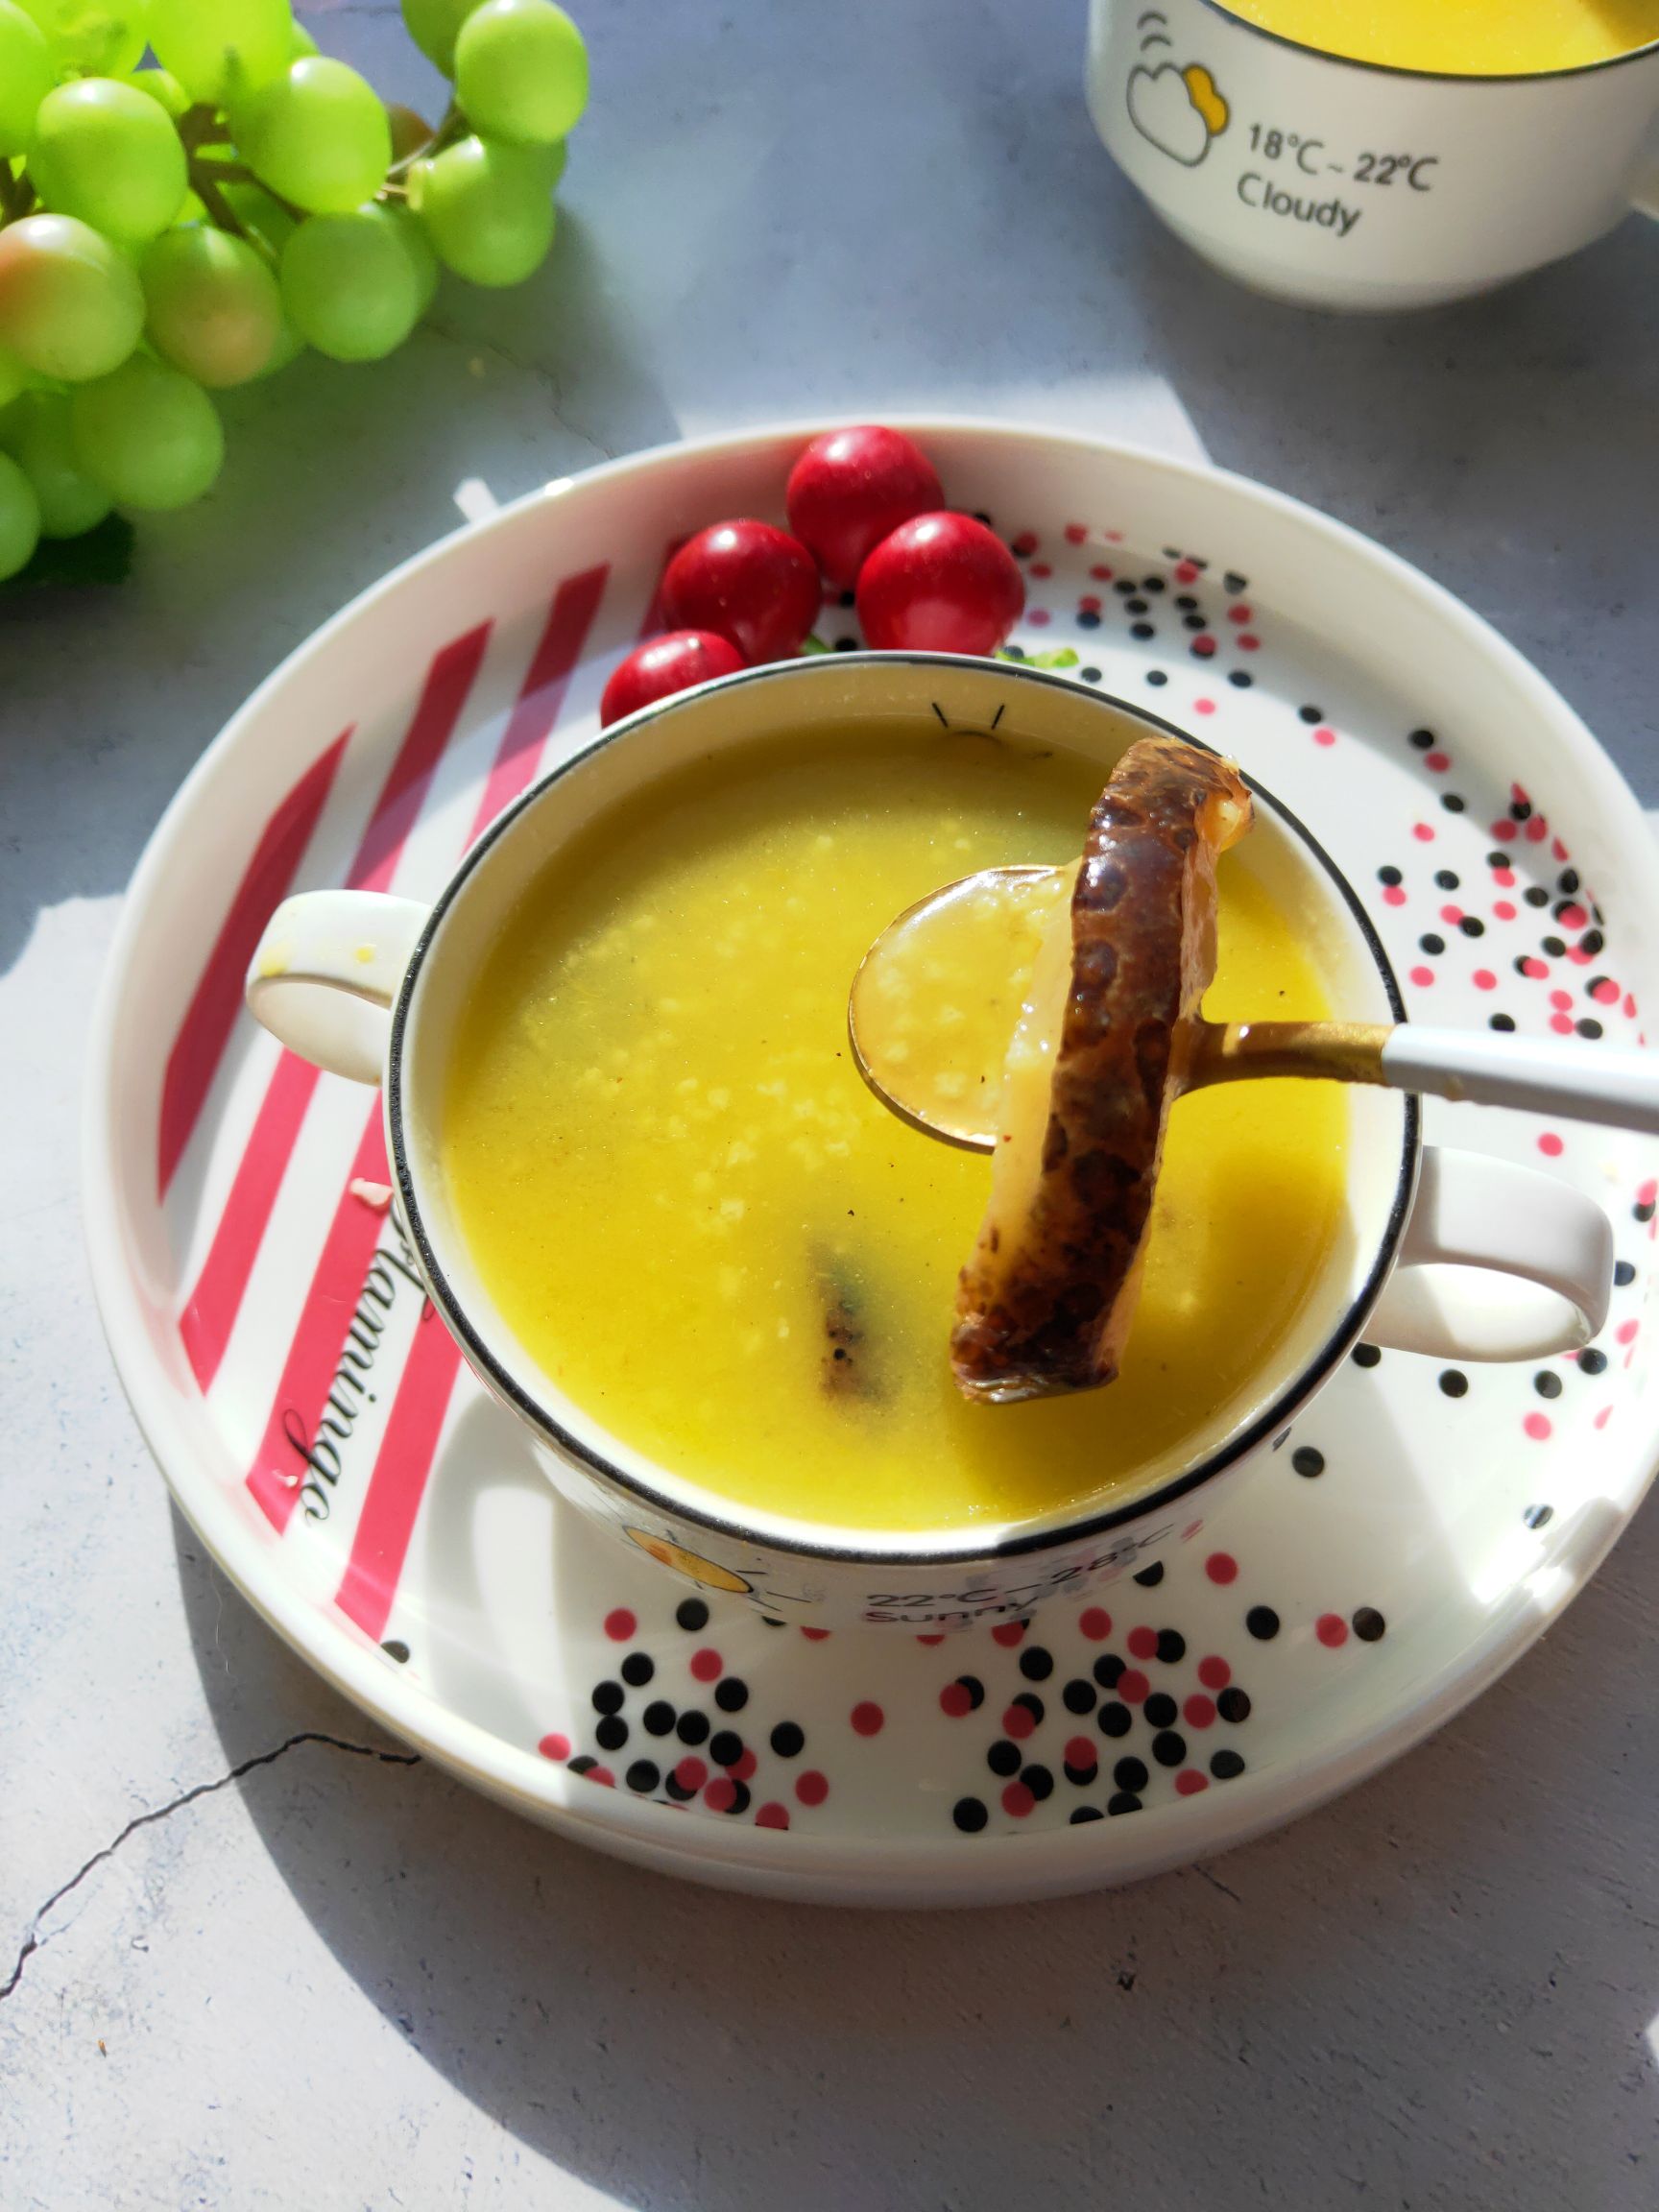 Simmered Sea Cucumber in Golden Soup recipe